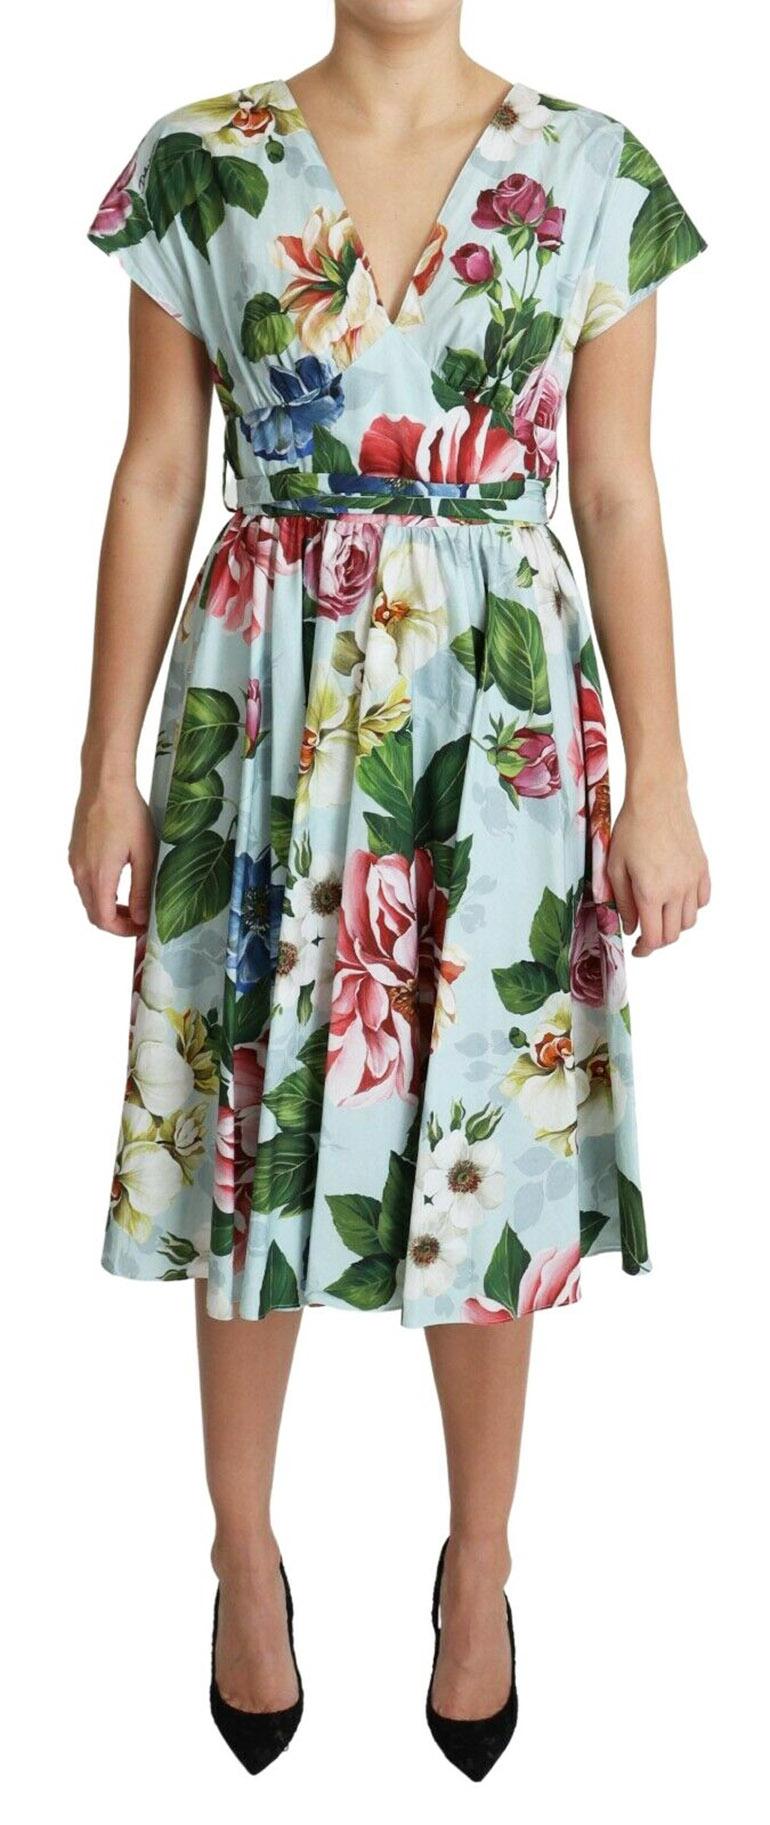 Gorgeous brand new with tags, 100% Authentic Dolce & Gabbana Green dress. Made of cotton. Zip fastening at the back. Decorated with a colorful floral print and gathers. V-neck.


Model: Short Sleeves V-neck

Color: Green multicolor floral